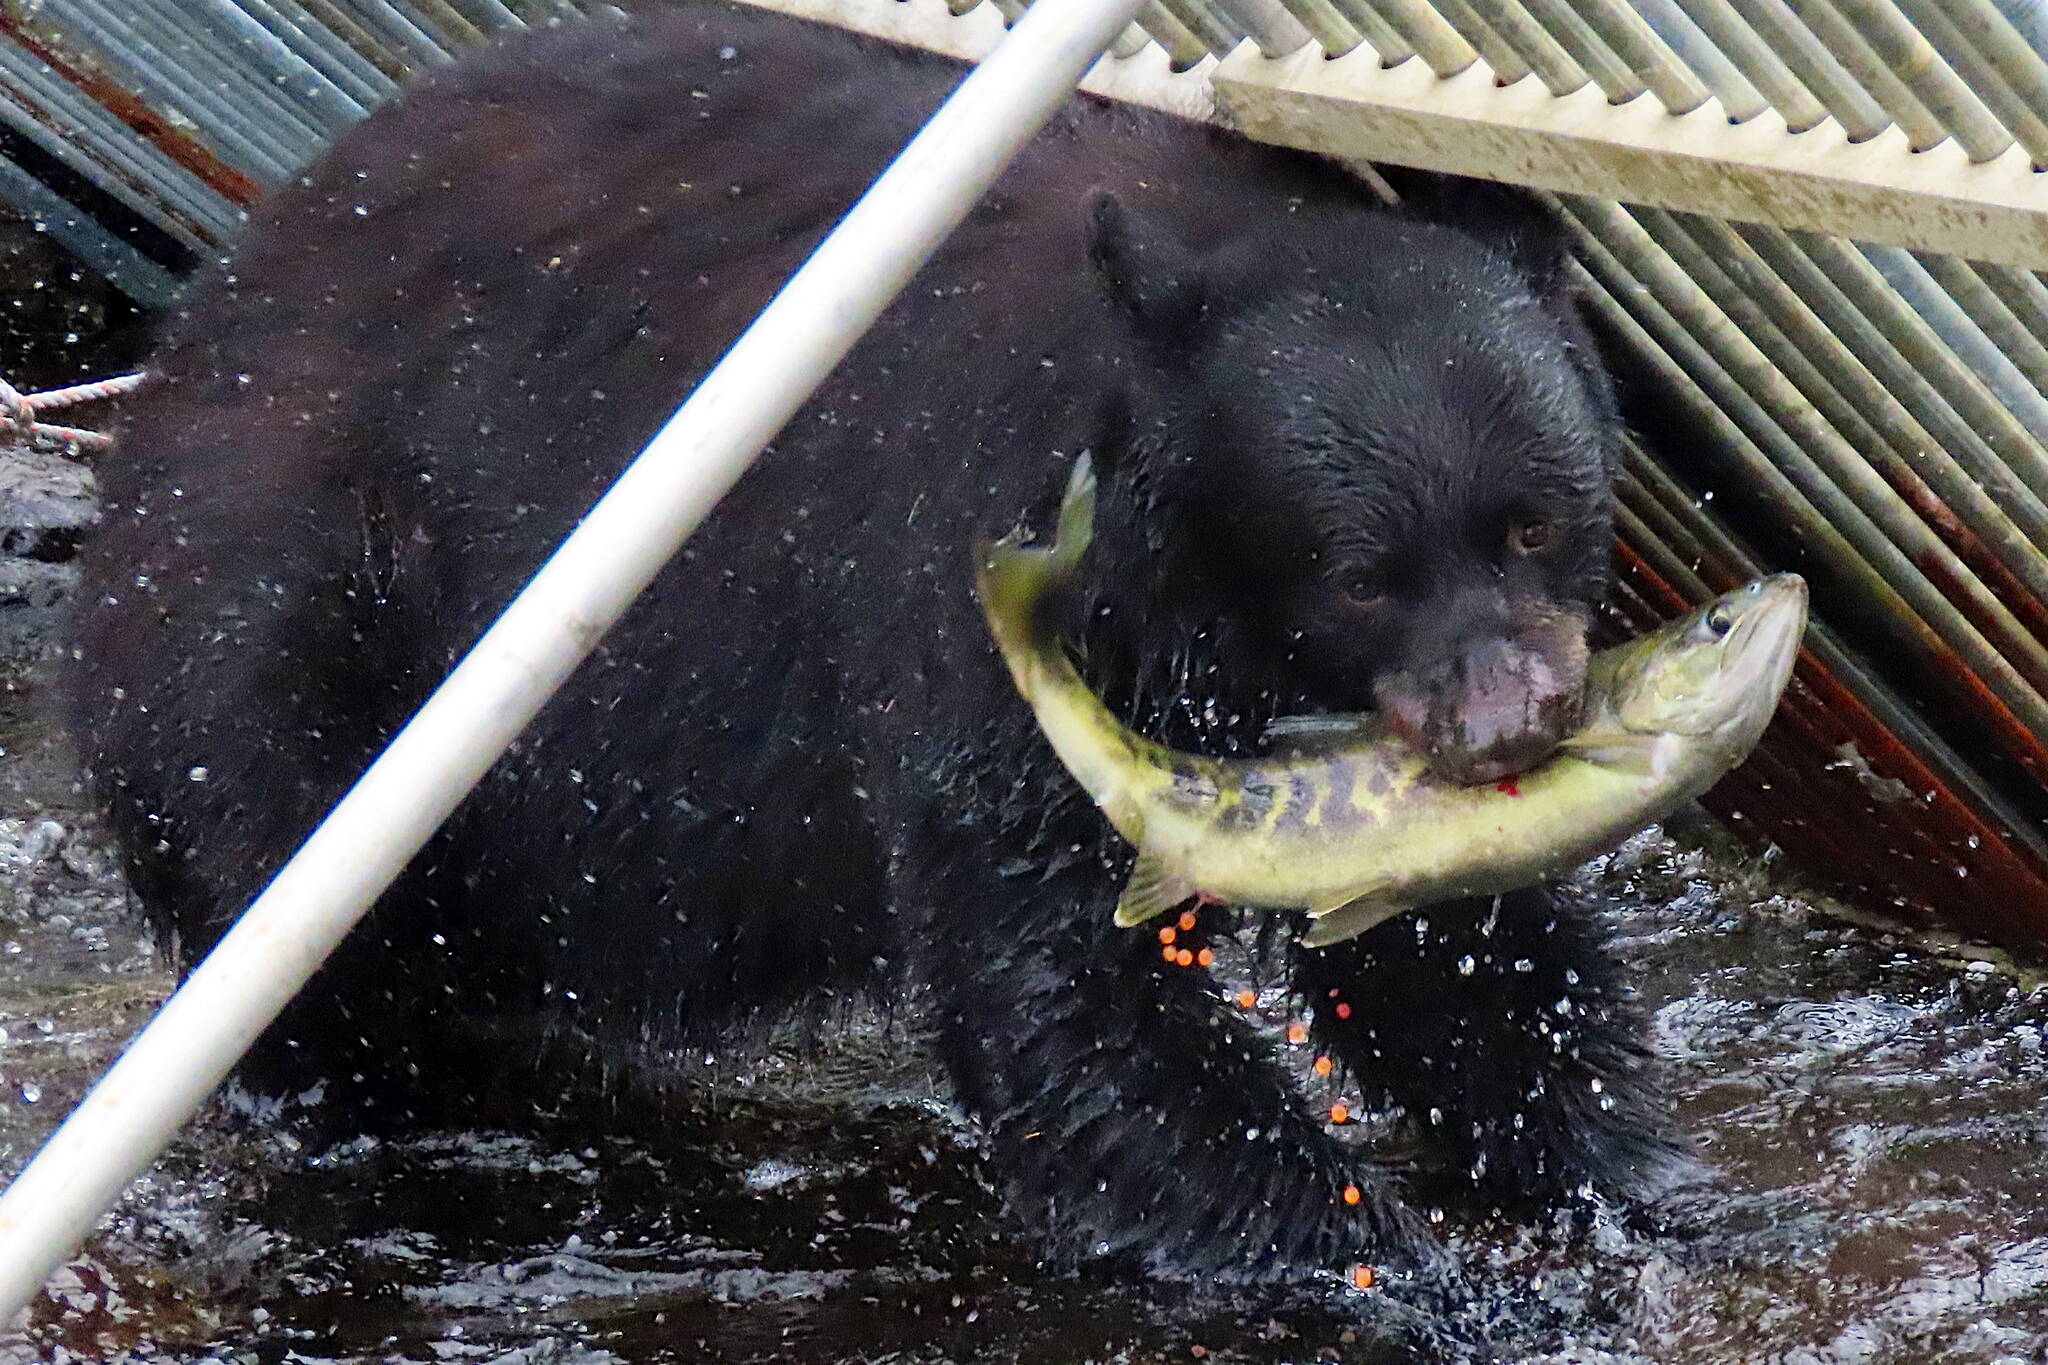 A black bear catches a salmon, causing eggs to squirt out, at Peterson Lake on July 26. The bear then ignored the salmon and ate the eggs before hunting for more fish. (Photo by Steve Hamilton)